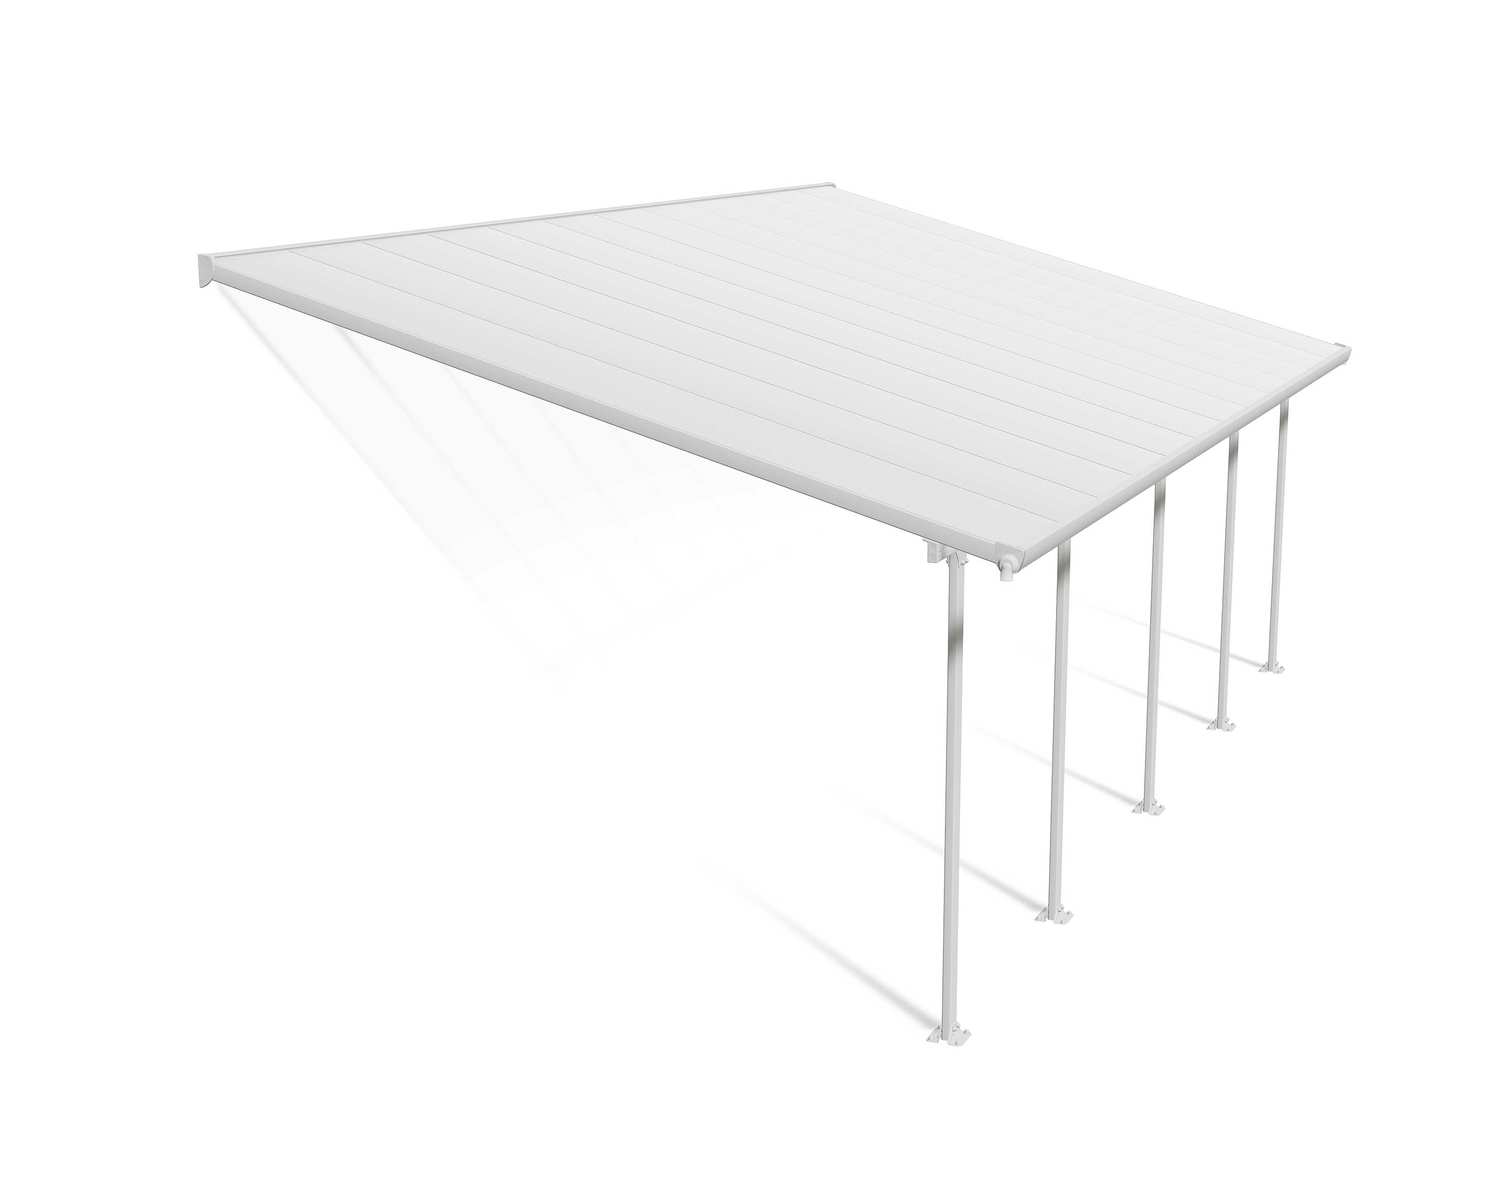 Feria 13 ft. x 26 ft. White Aluminium Patio Cover With 5 Posts, White Twin-Wall Polycarbonate Roof Panels.